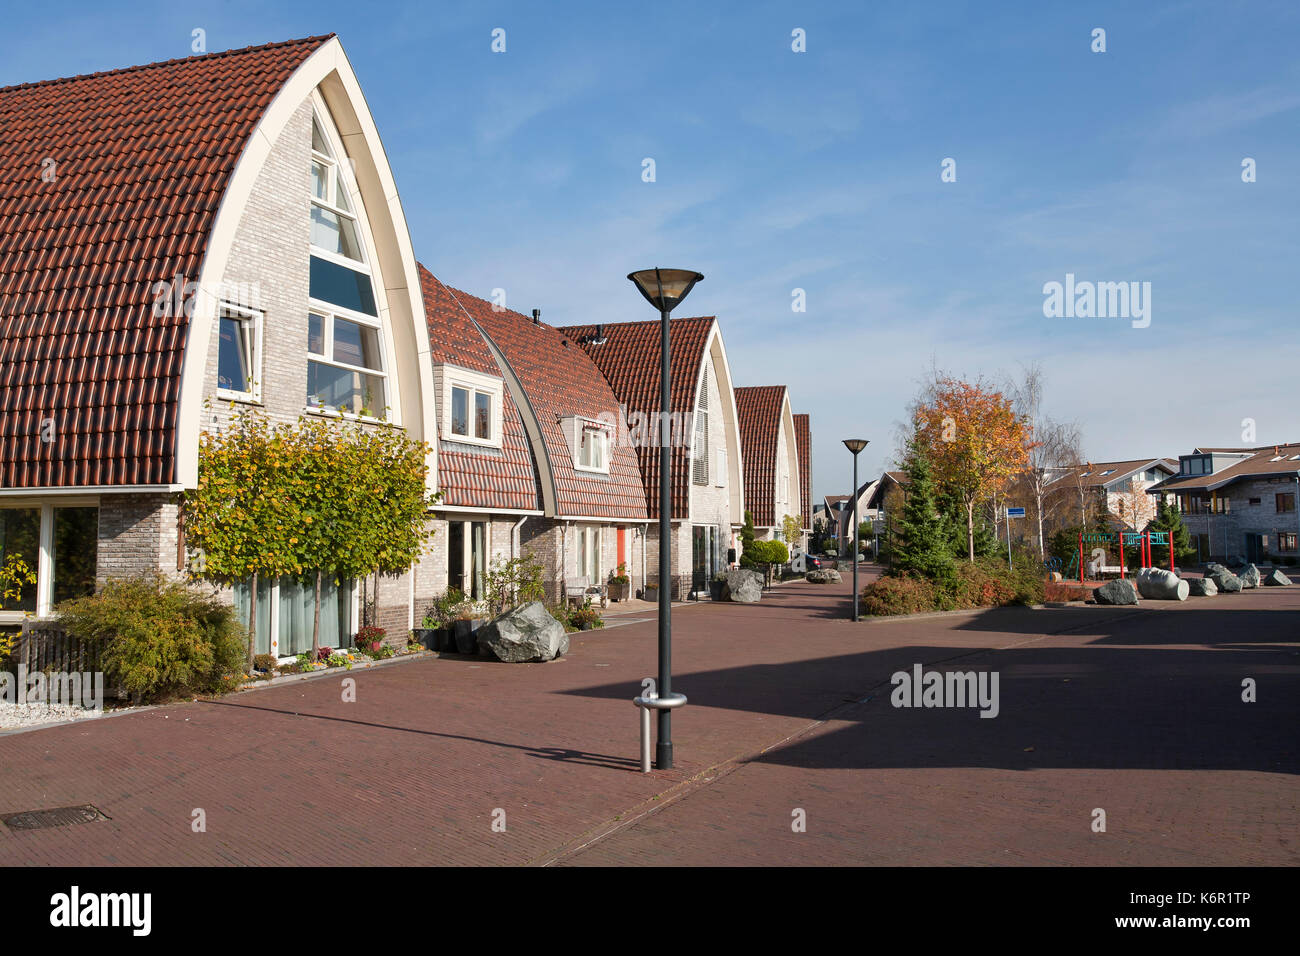 Home zone in a residential district Stock Photo